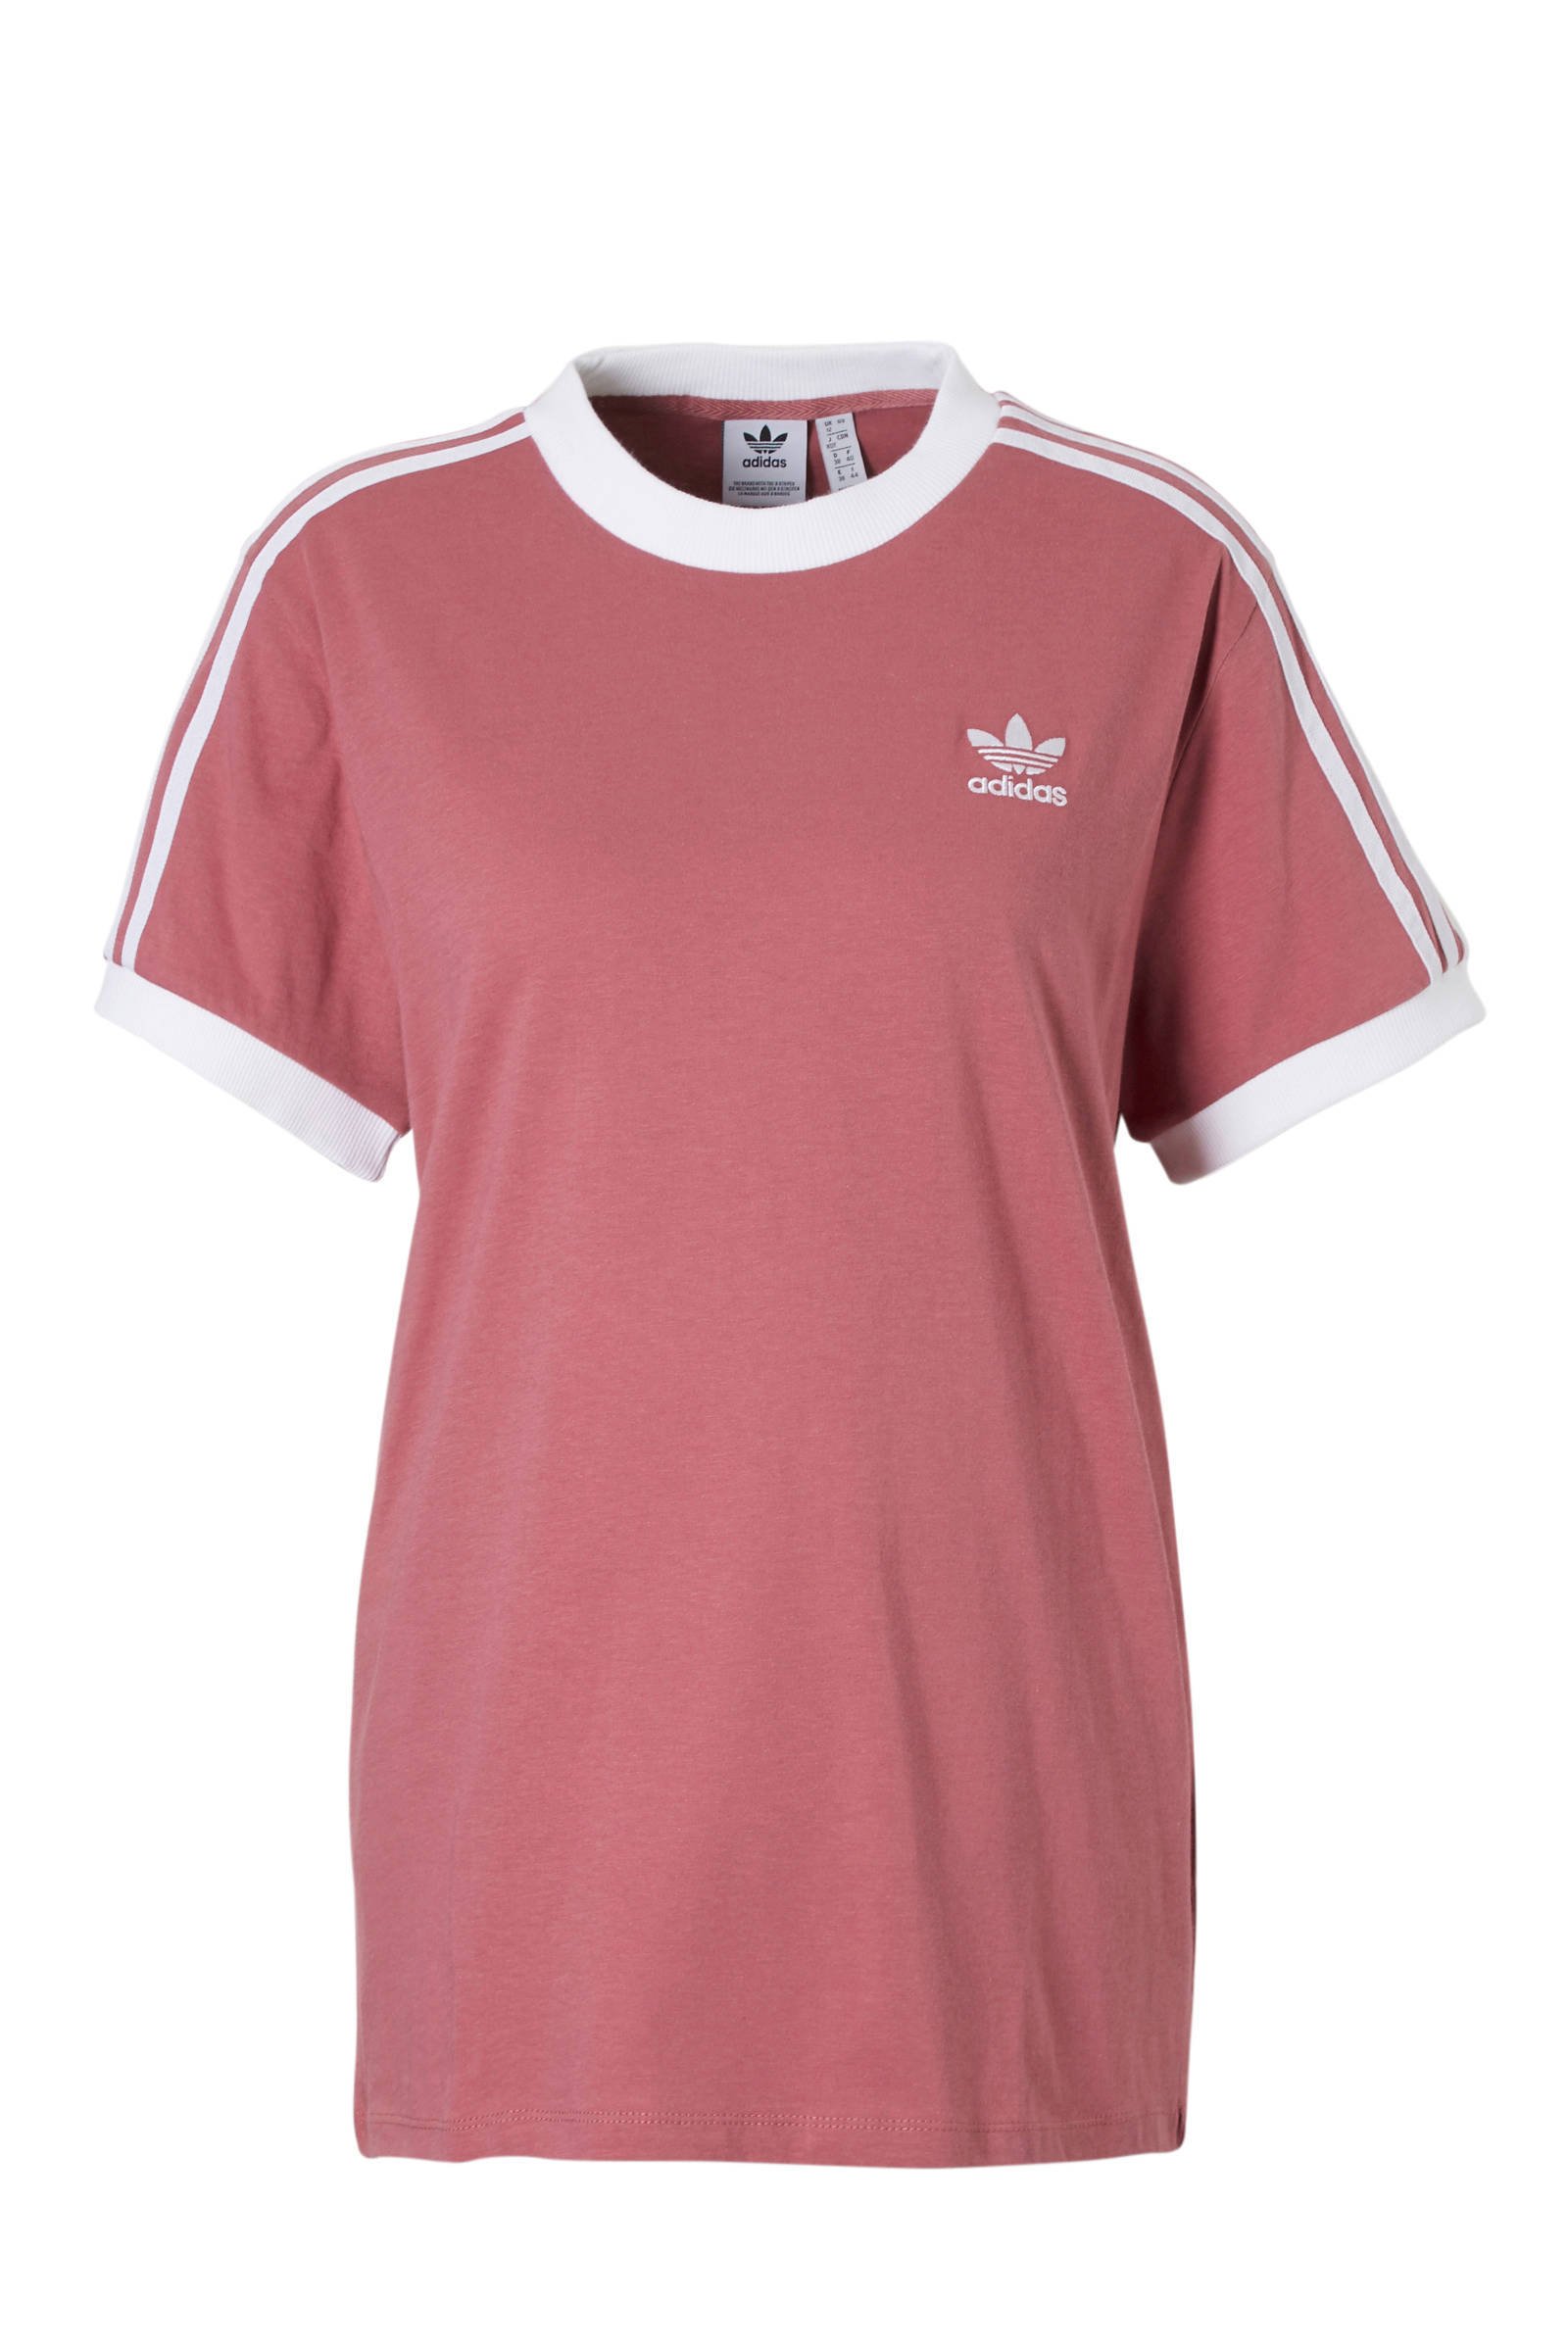 adidas outfit dames